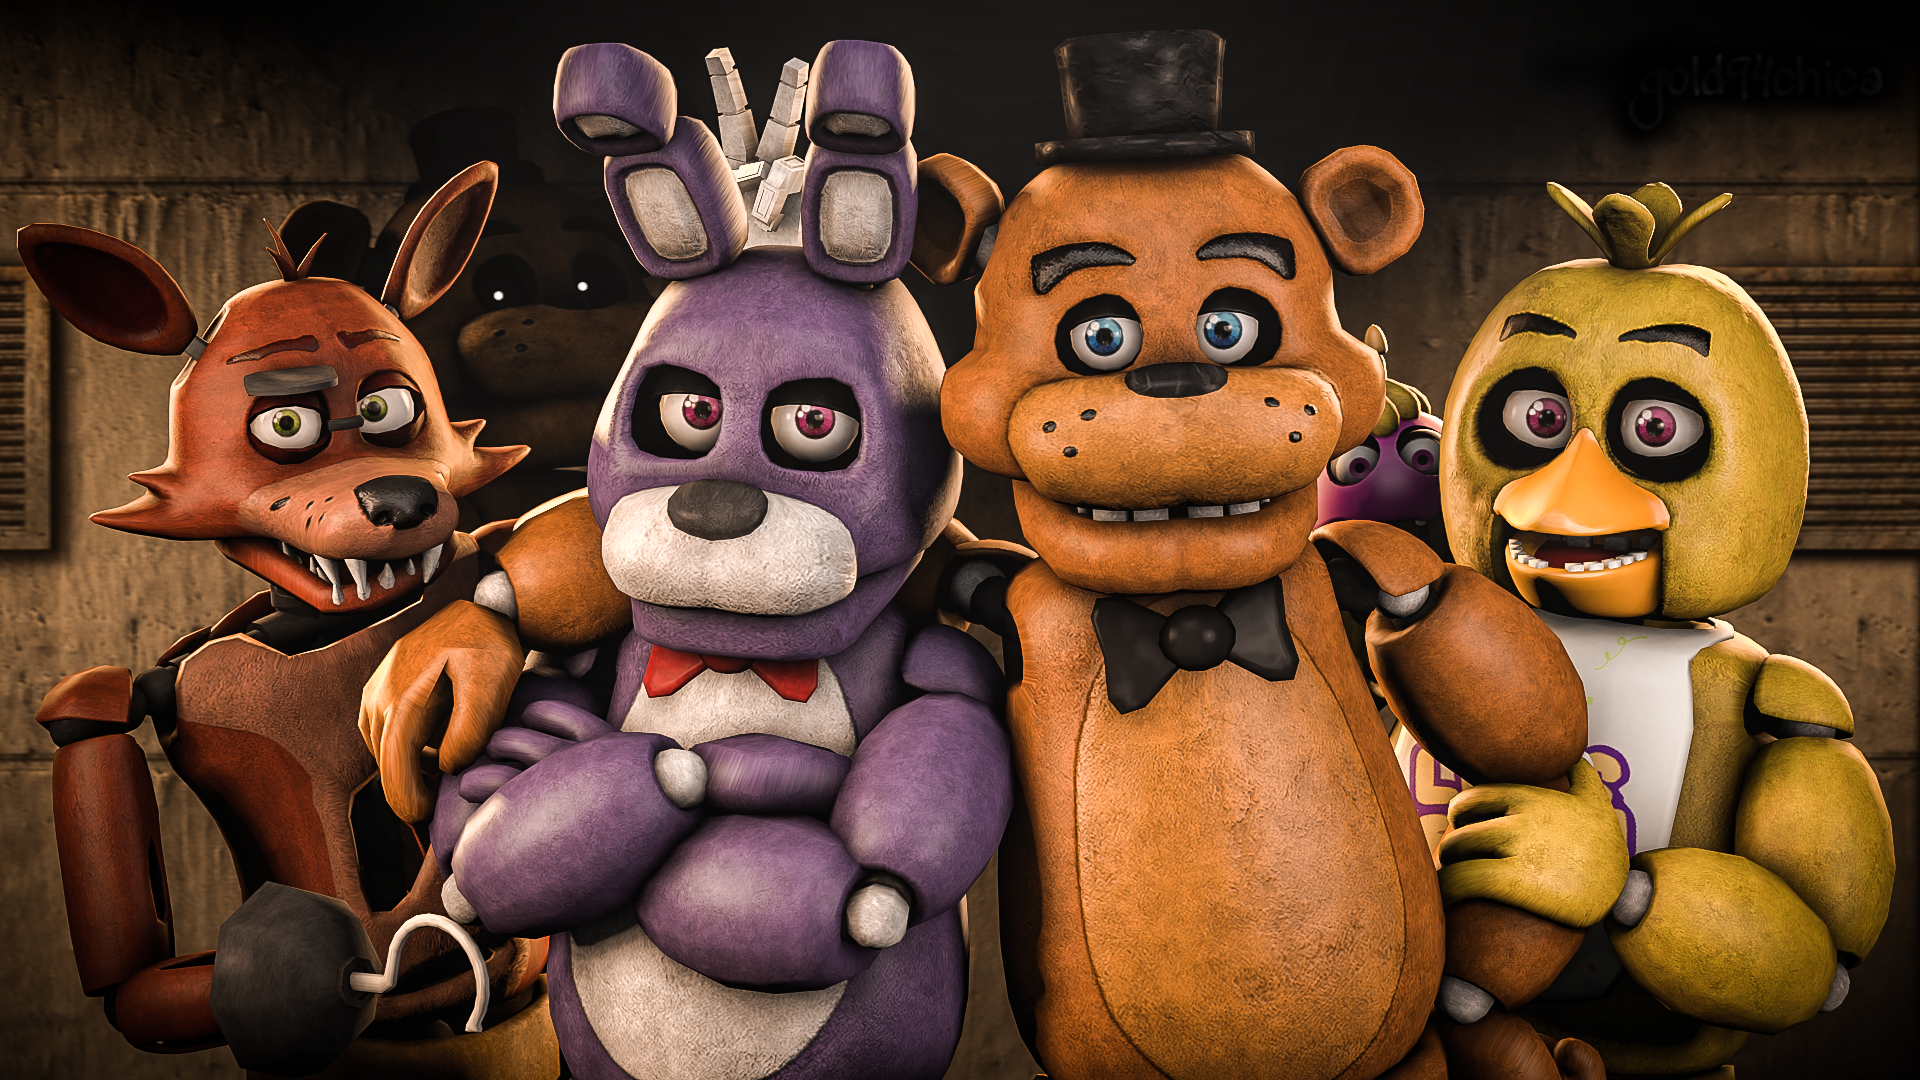 1920x1080 Five Nights At Freddy's Wallpaper Background Image. 